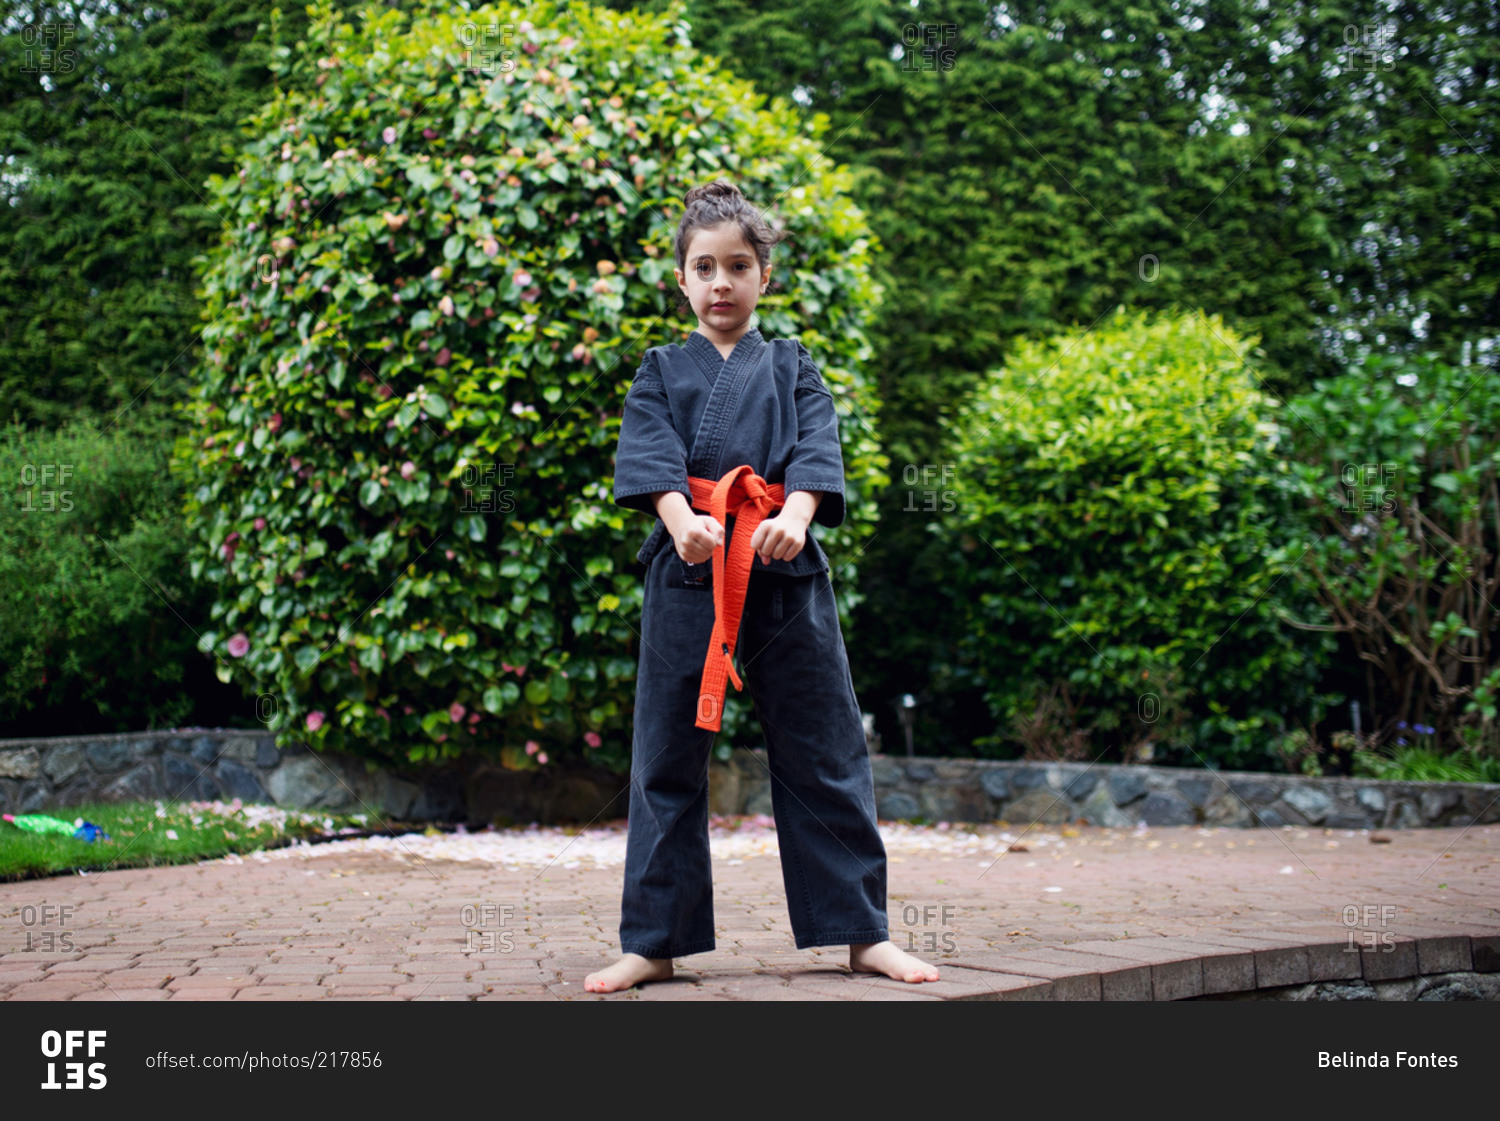 A girl in a karate uniform stands with her fists in front of her